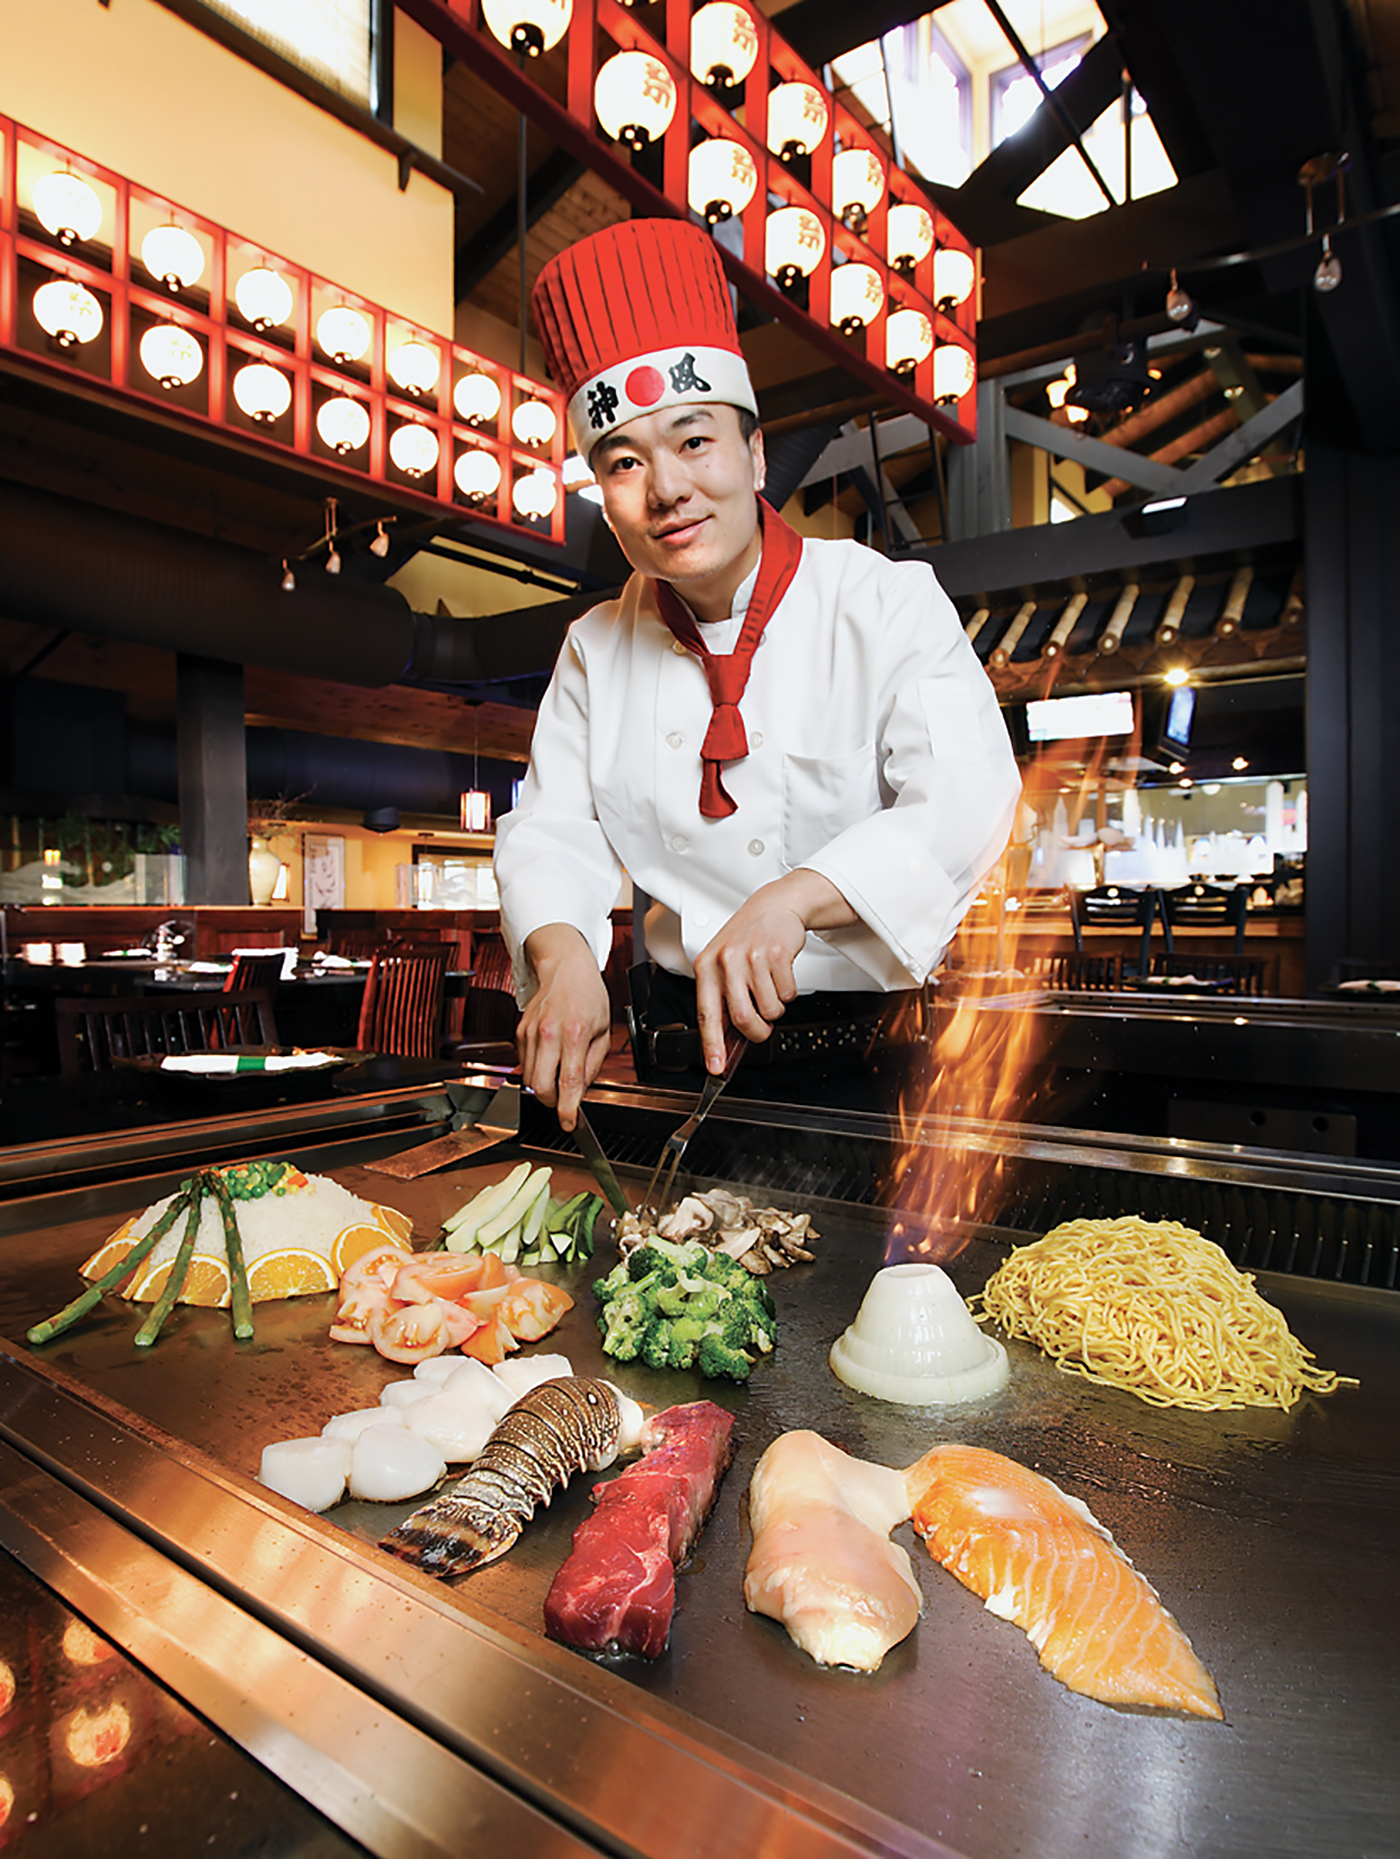 Been to KOTO Japanese Restaurant? Share your experiences!